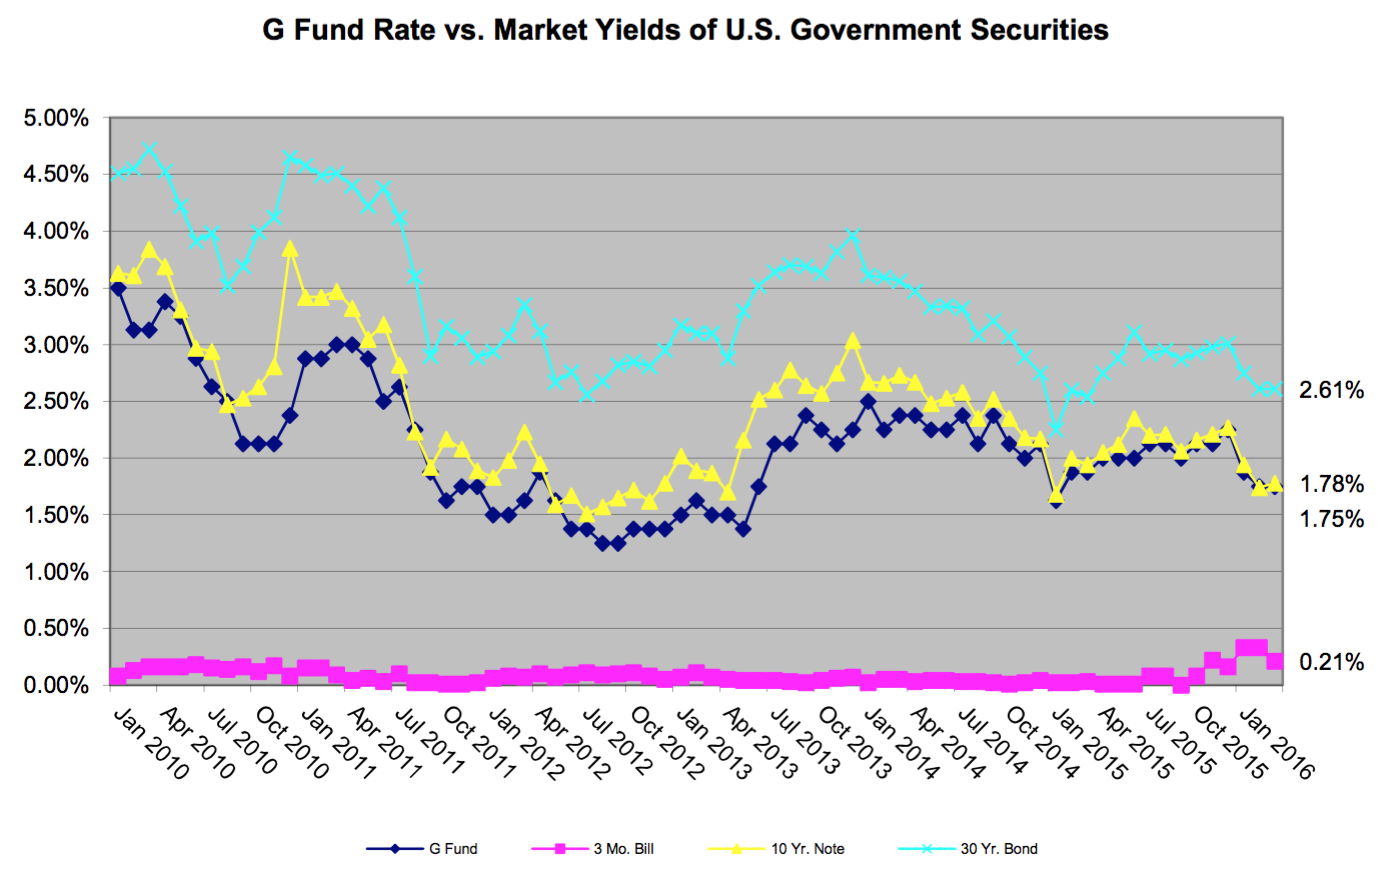 Image of chart comparing the G Fund's rate to that of government securities